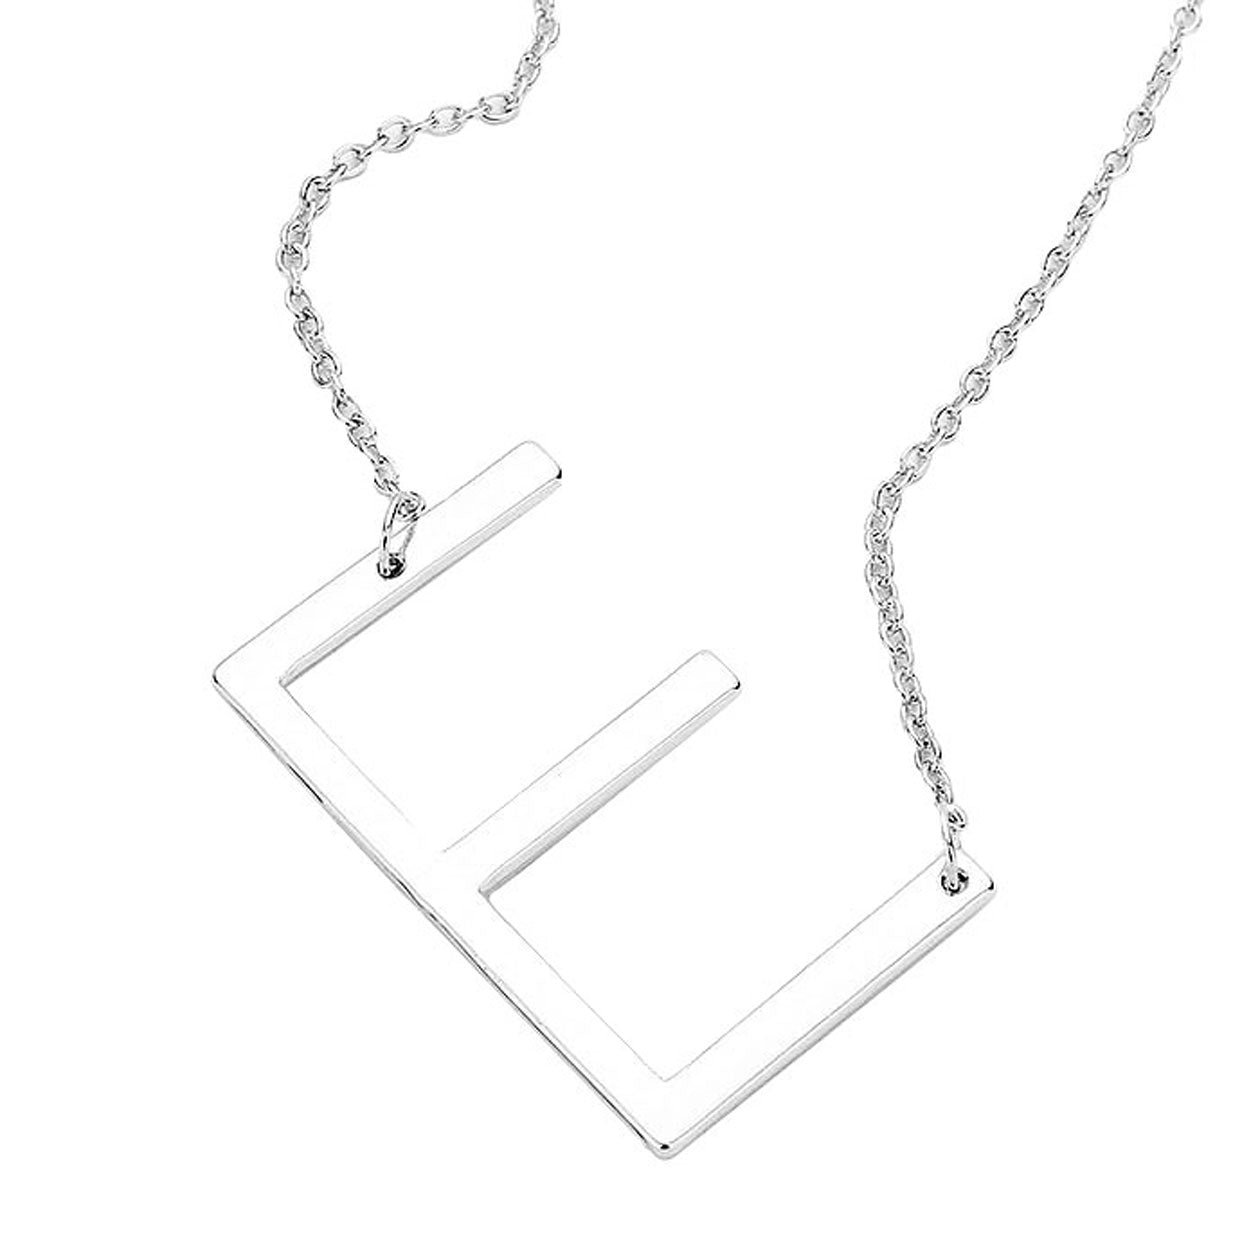 Silver E Monogram Metal Pendant Necklace. Beautifully crafted design adds a gorgeous glow to any outfit. Jewelry that fits your lifestyle! Perfect Birthday Gift, Anniversary Gift, Mother's Day Gift, Anniversary Gift, Graduation Gift, Prom Jewelry, Just Because Gift, Thank you Gift.